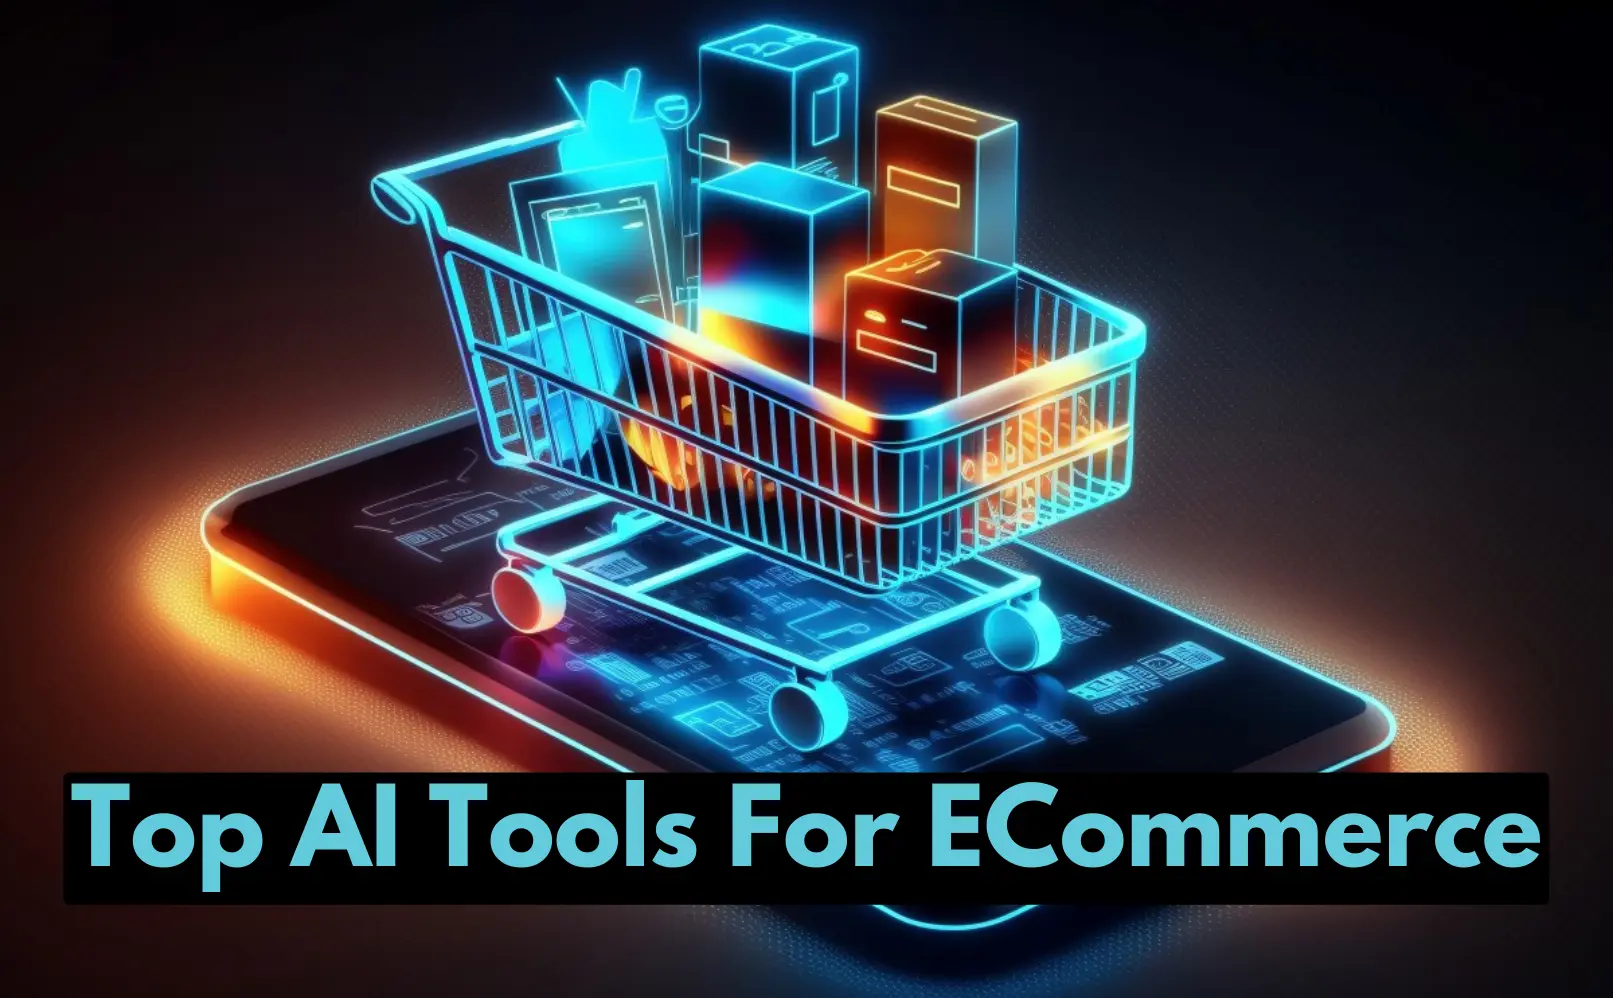 best AI tools for Ecommerce business growth are revealed! Find the best solutions for personalized suggestions or streamlined processes.